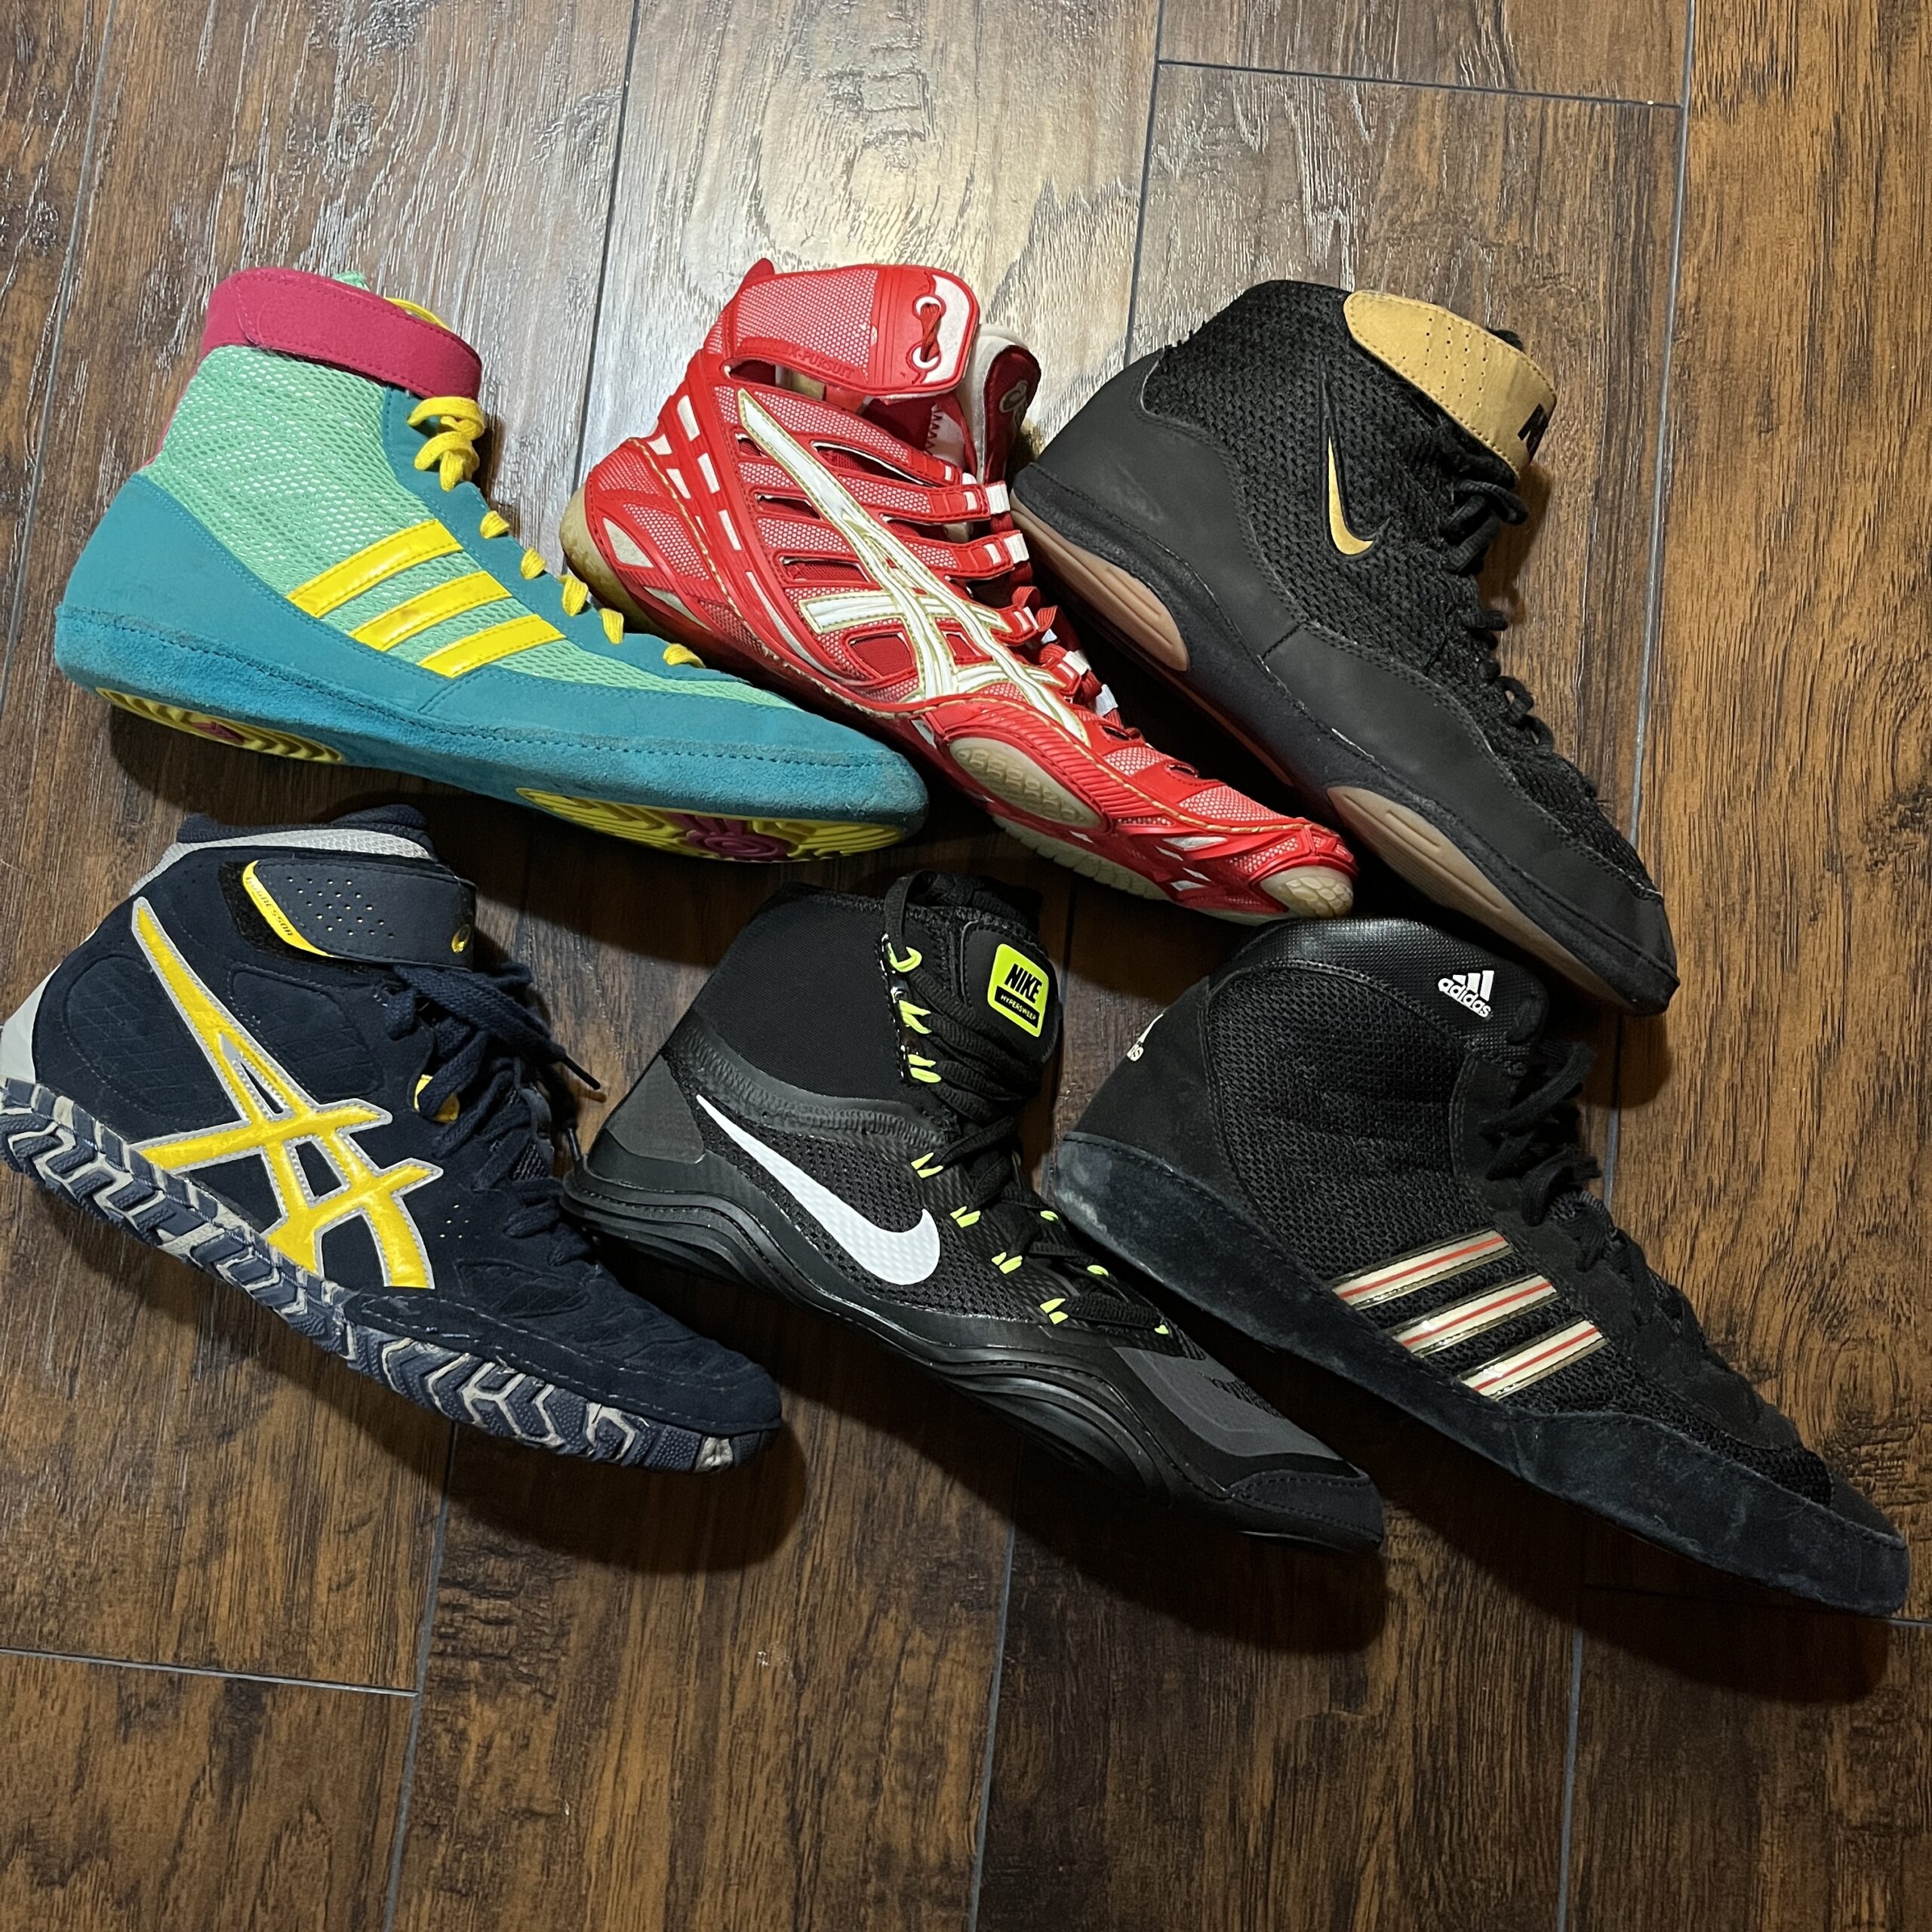 Wrestling Shoes Buying Guide